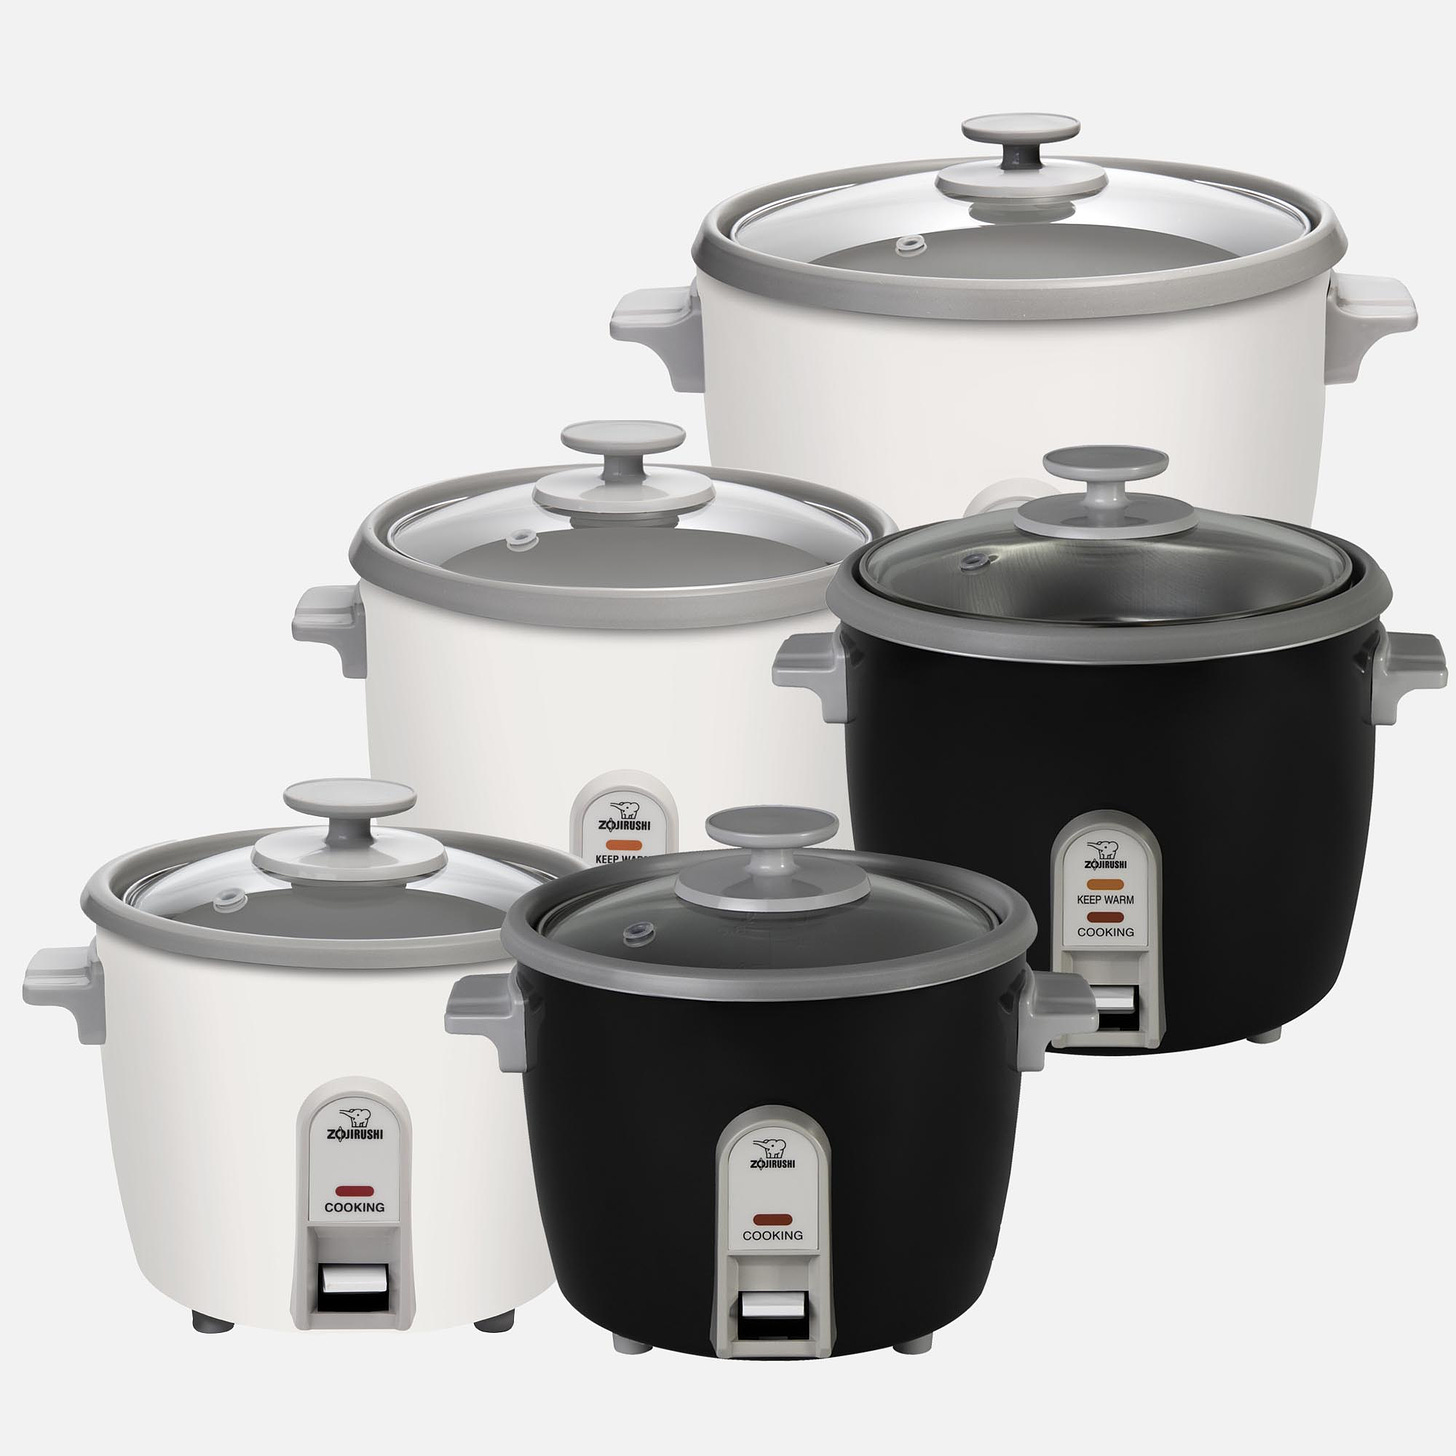 image of conventional rice cooker appliances